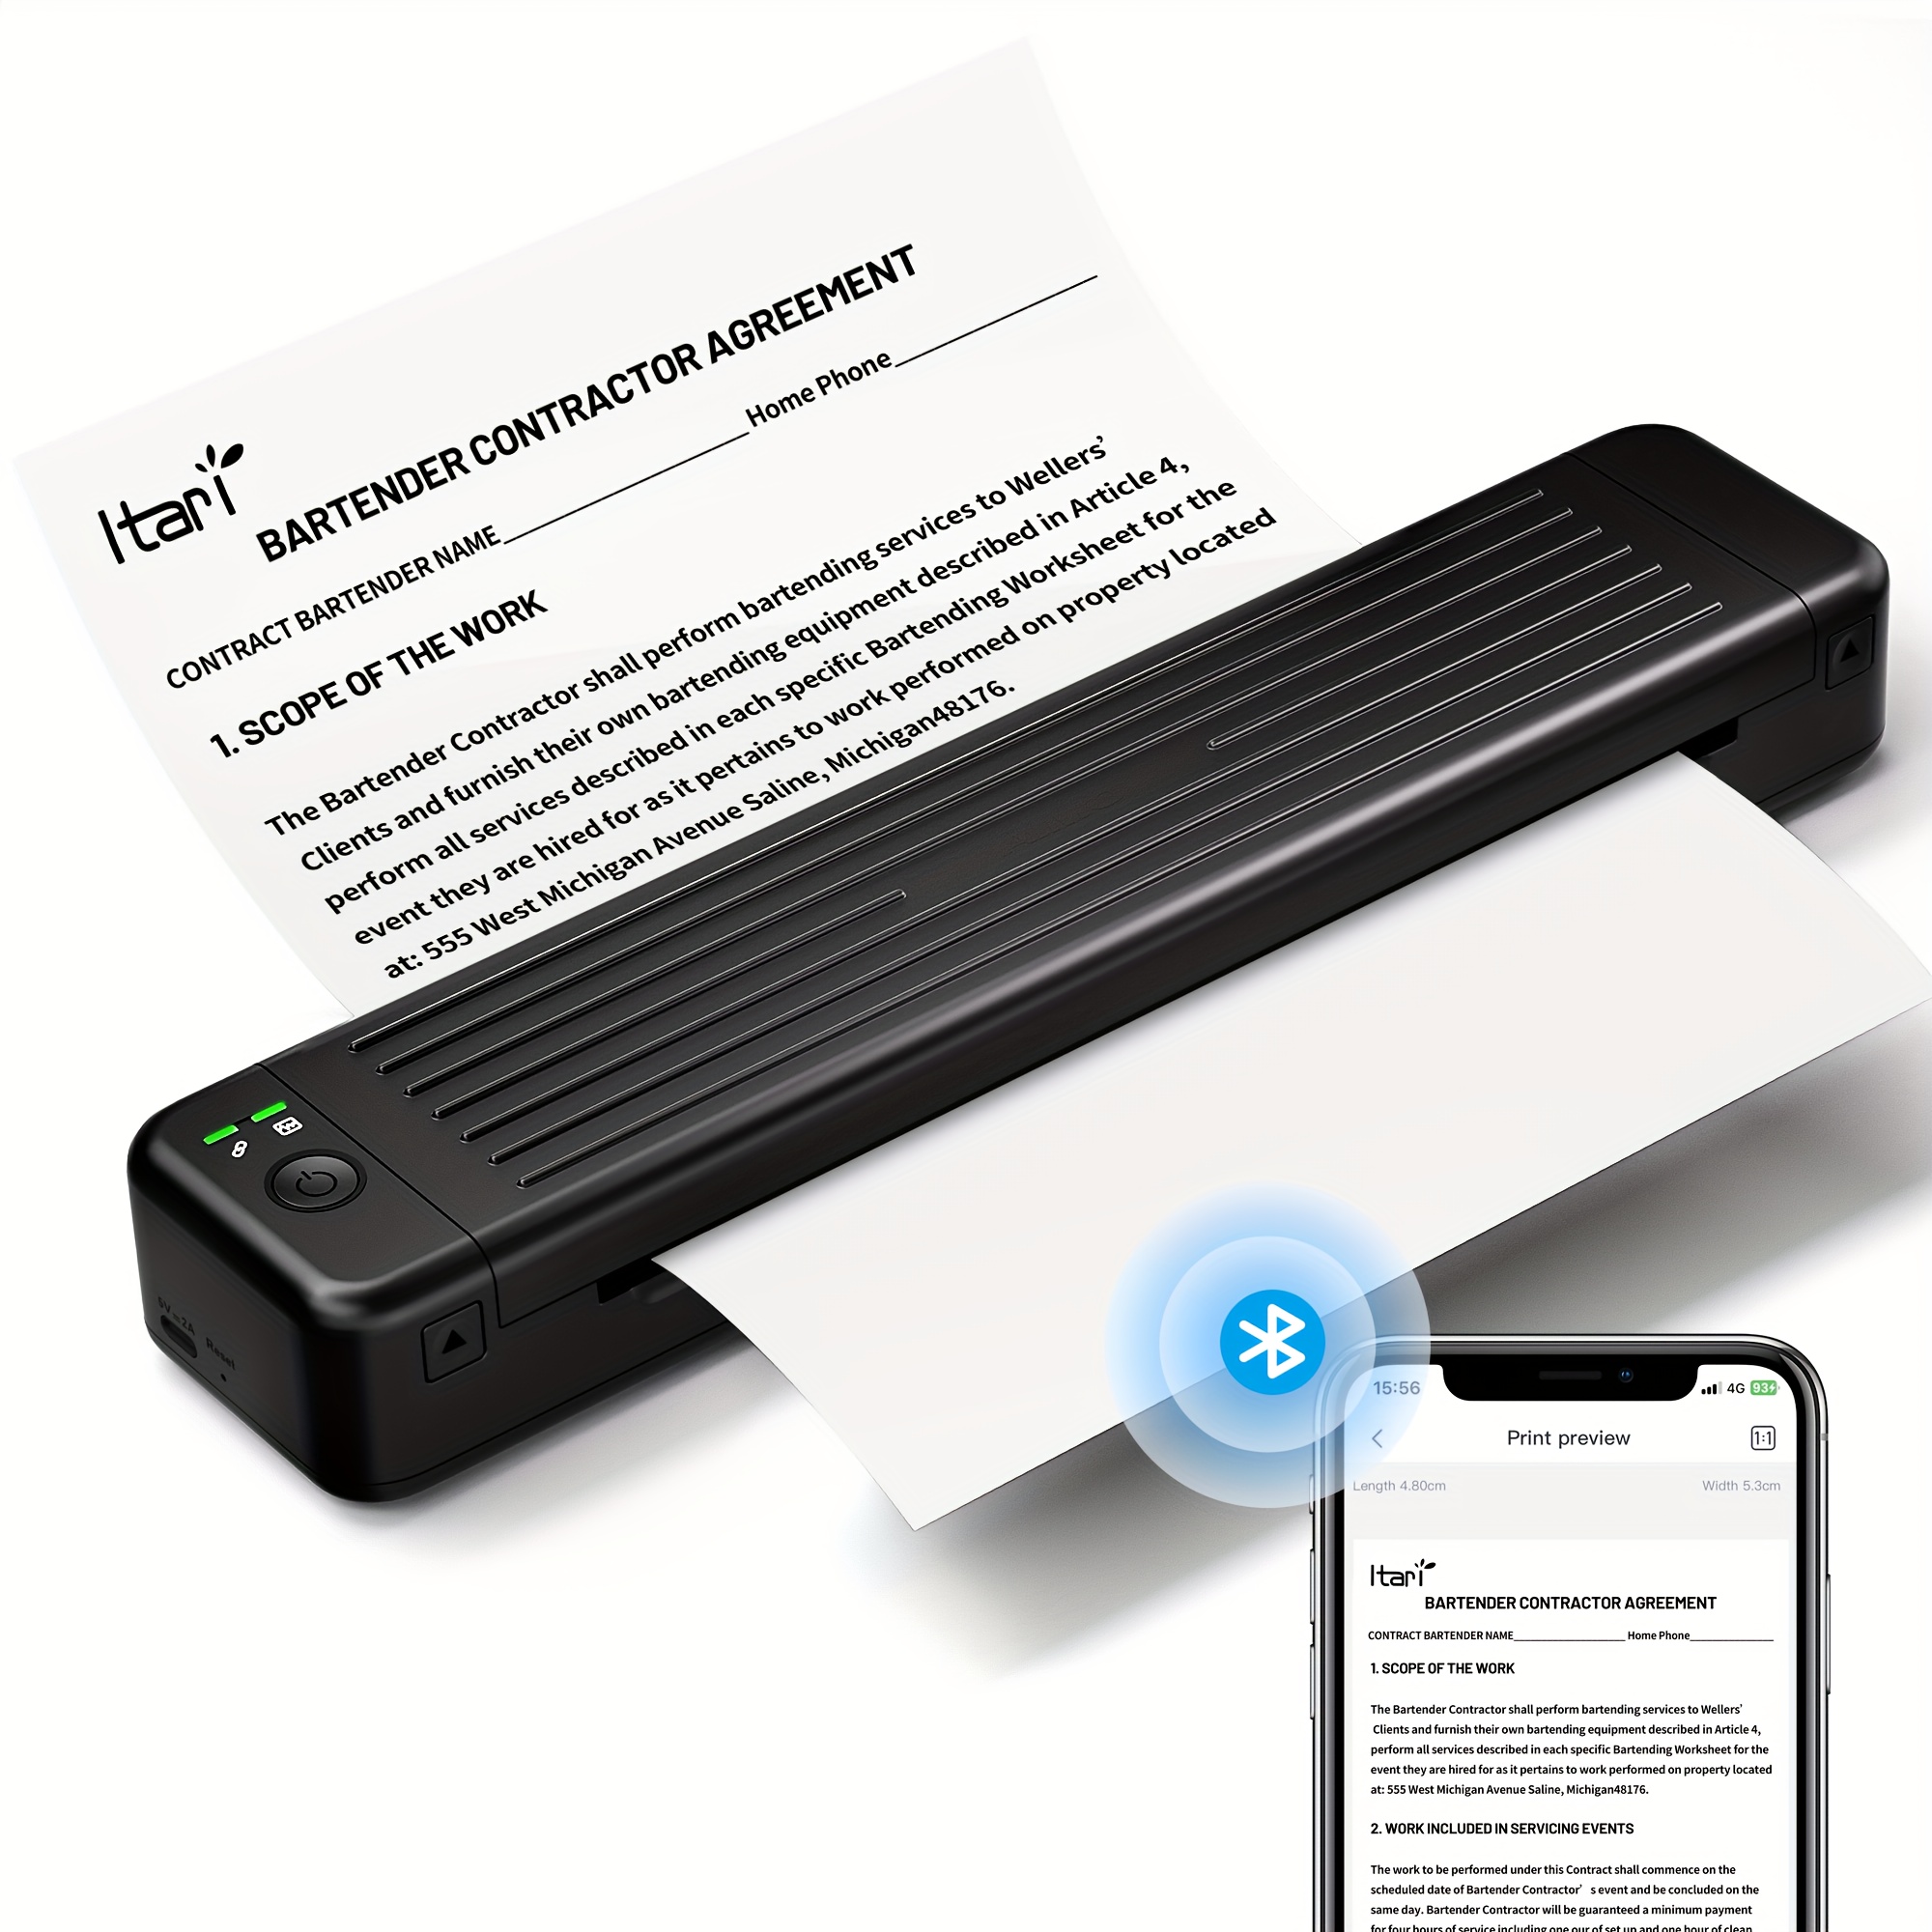  Itari Portable Thermal Printer Wireless Travel - Bluetooth  Printer for Phone, Small Printer for Laptop, Compact Inkless Printer for  Vehicle Home Use School Office, Support 8.5 X 11 Letter Paper 